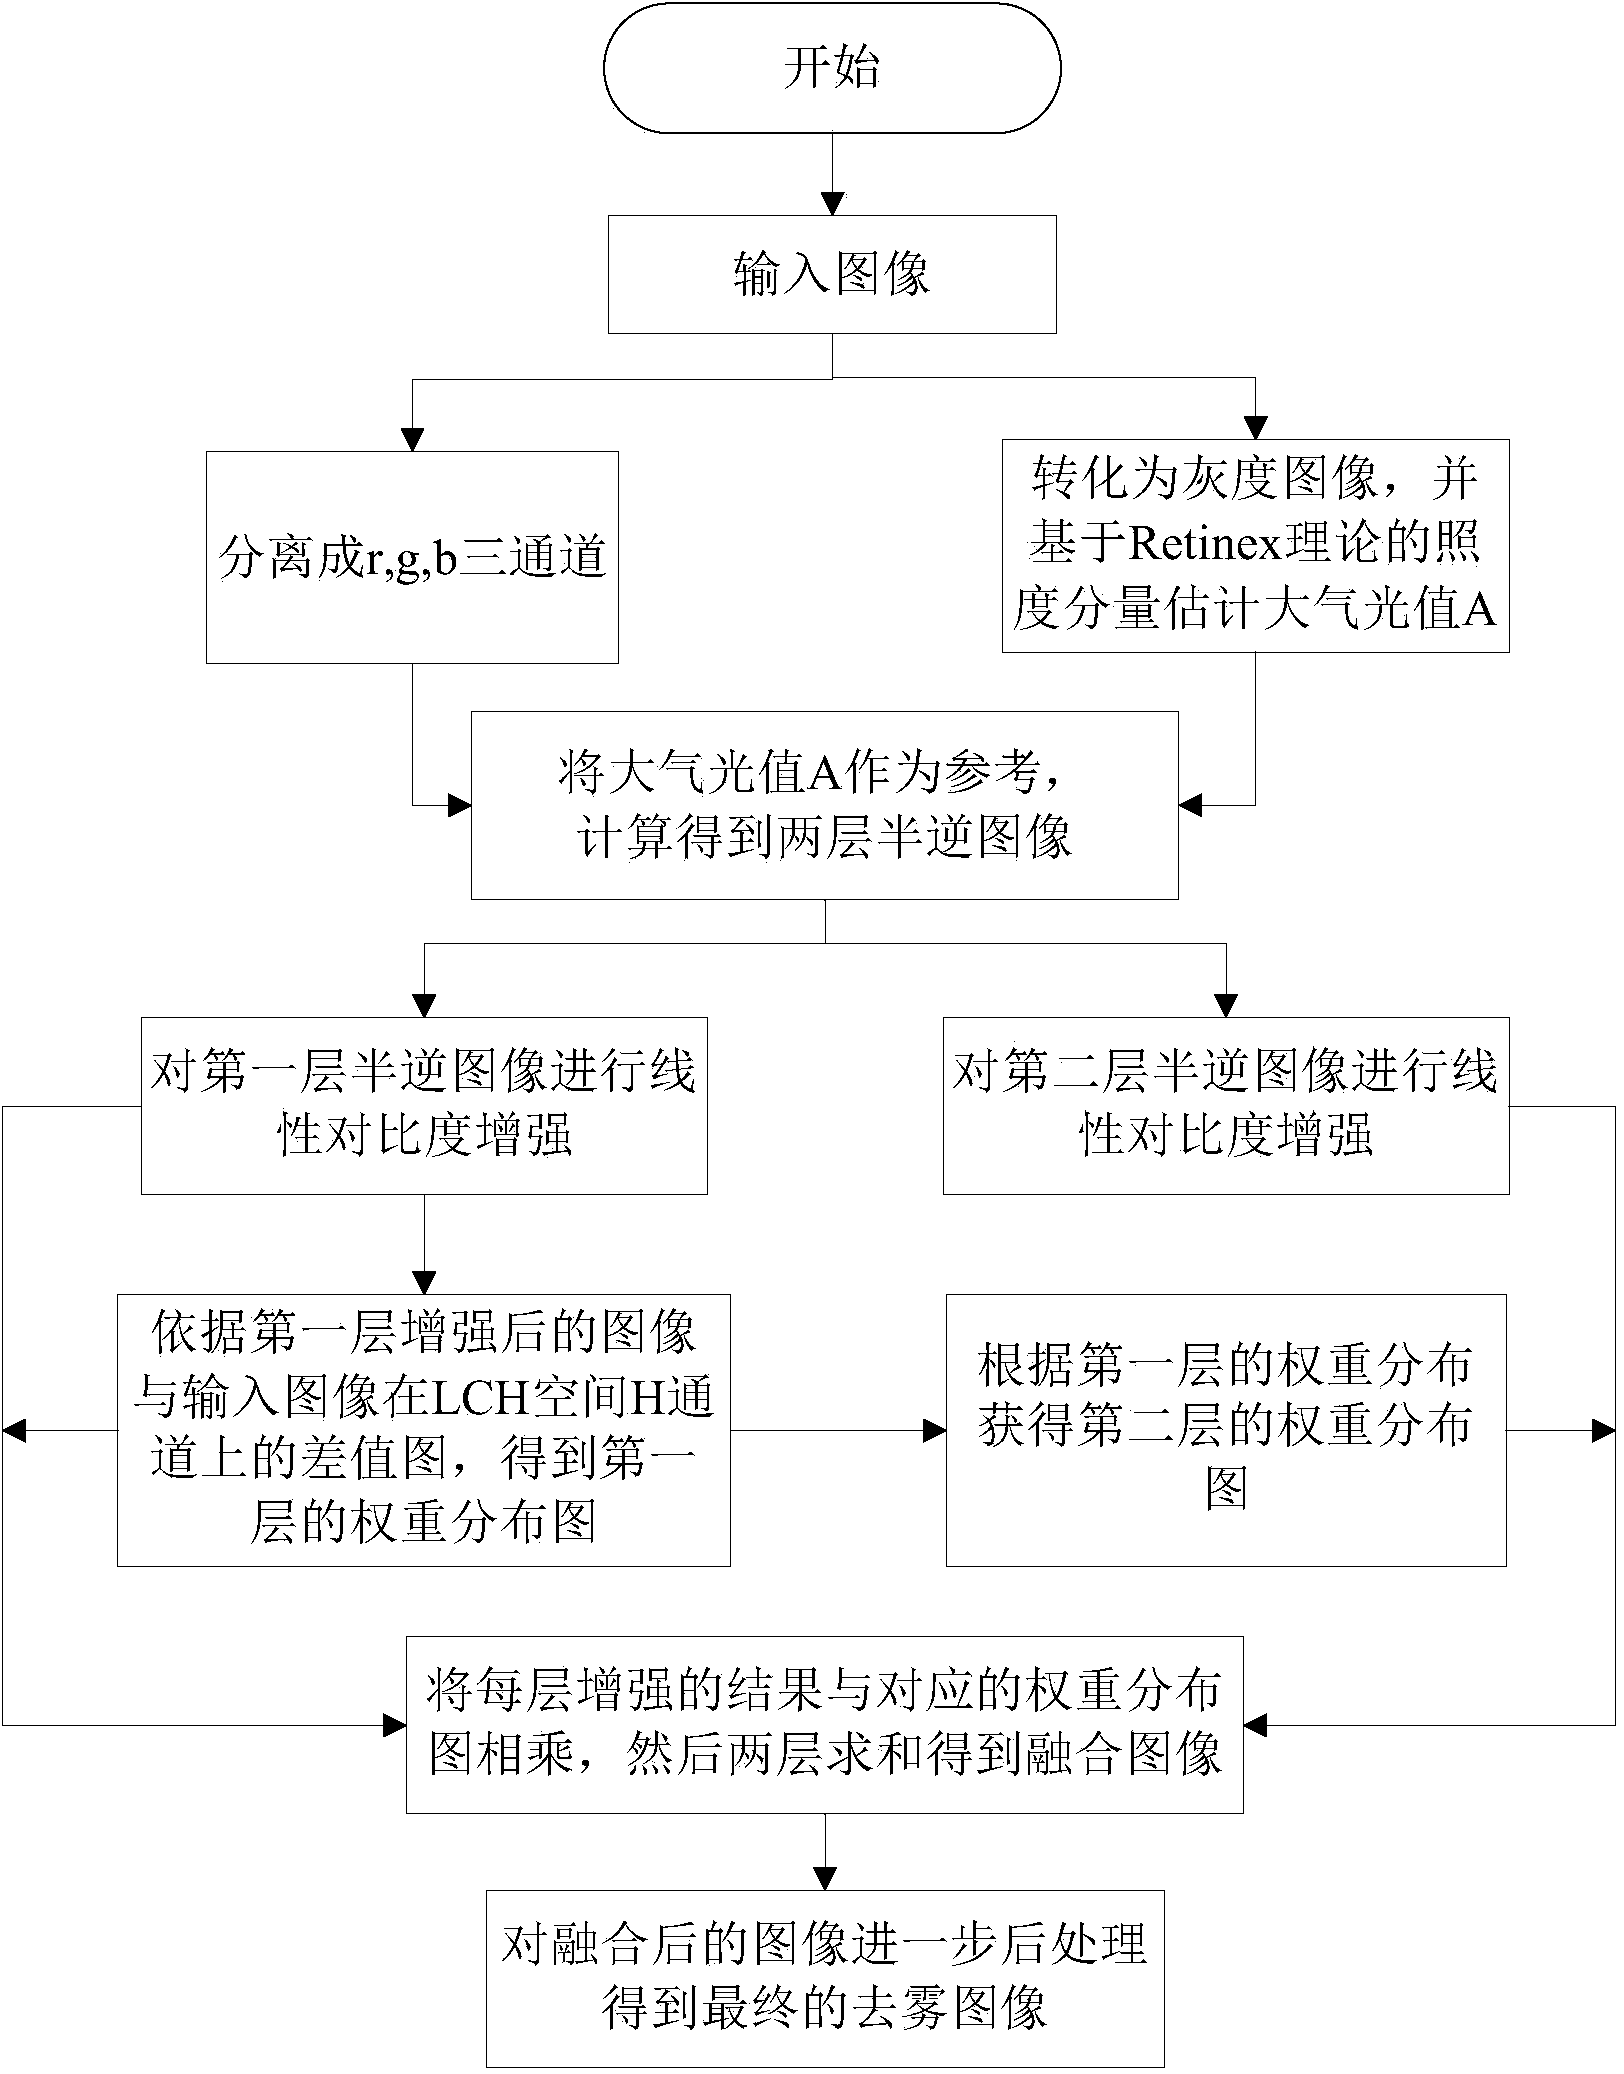 Image haze removal method and system based on image layer enhancement